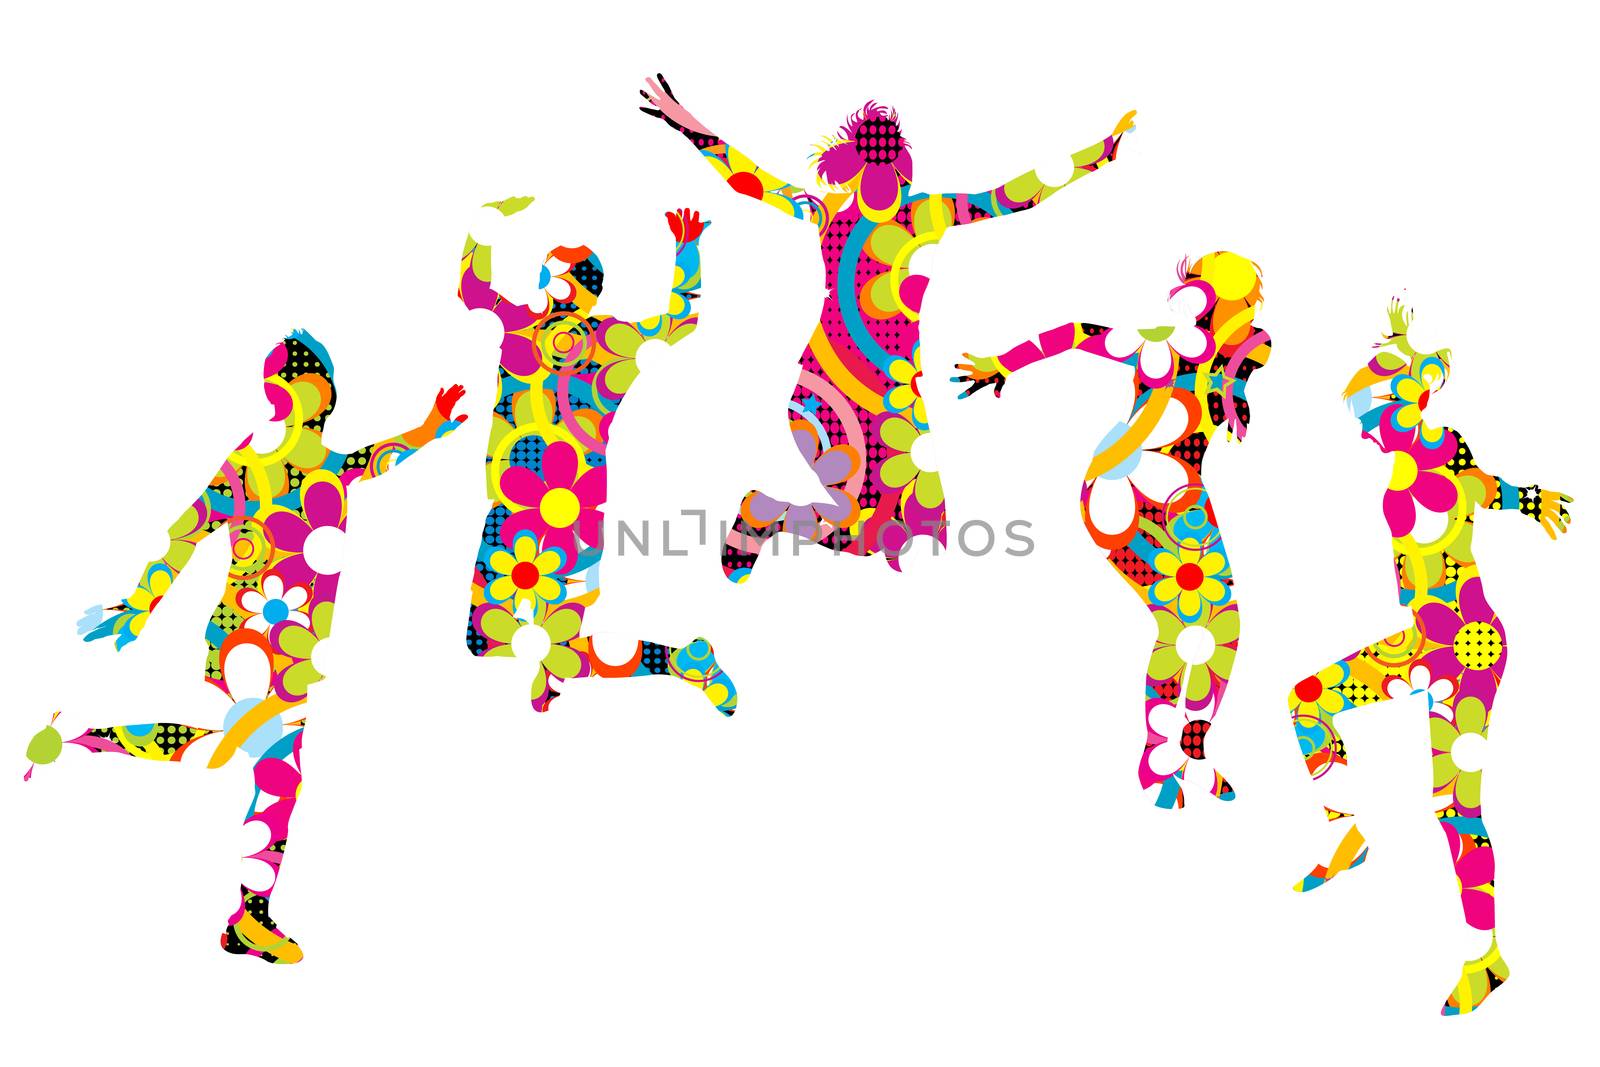 Floral patterned young people silhouettes jumping by hibrida13